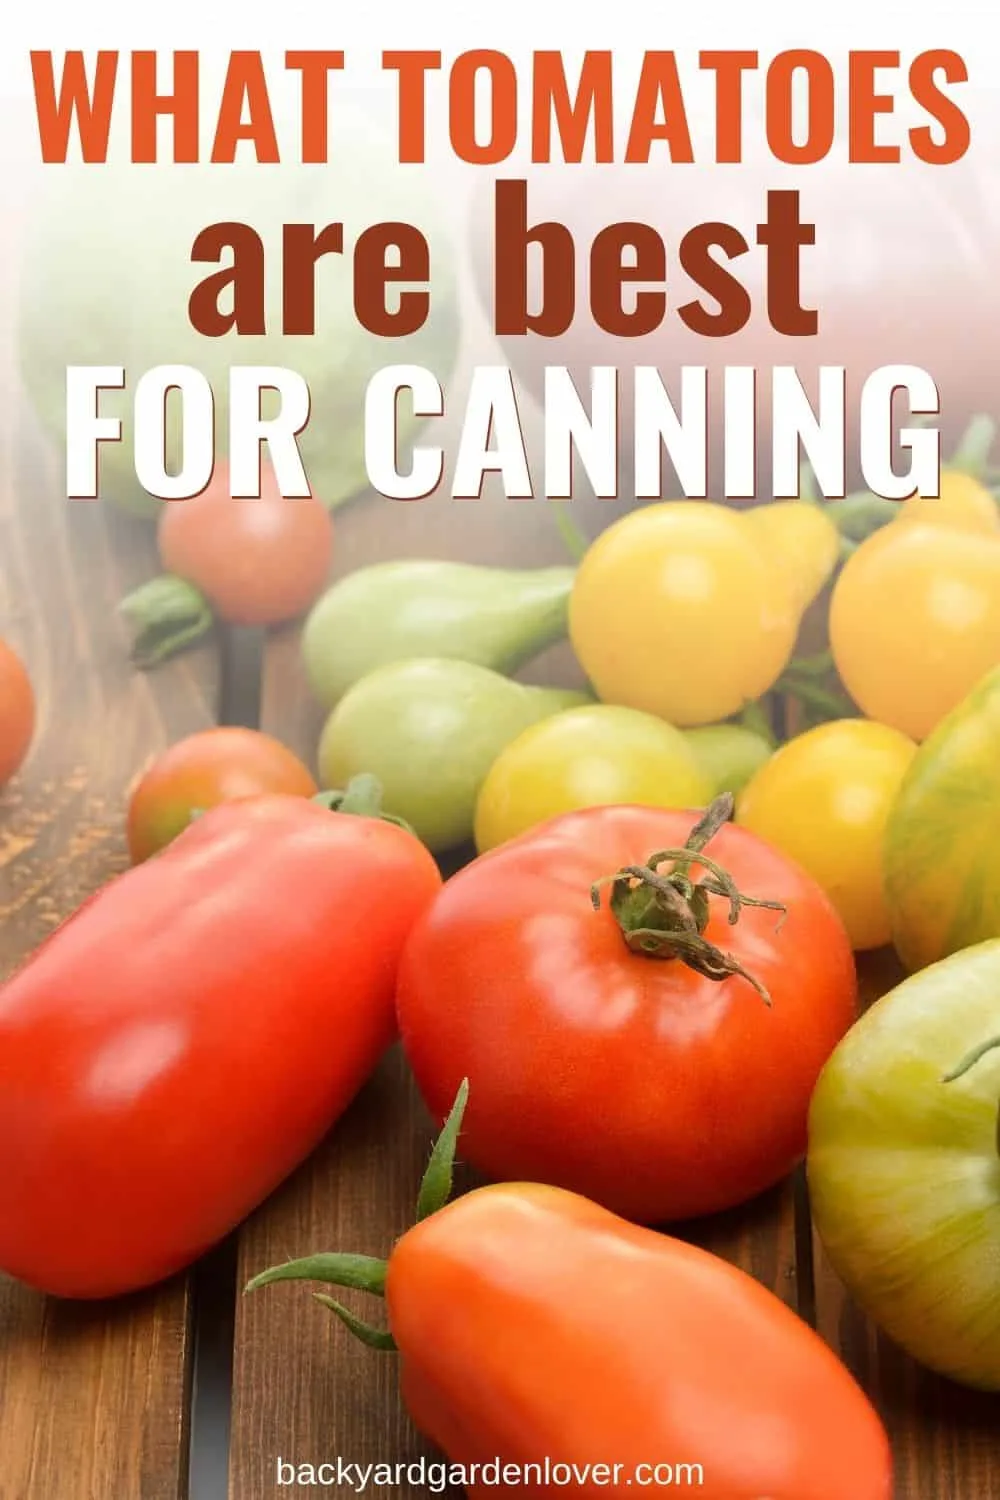 What tomatoes are best for canning - Pinterest image